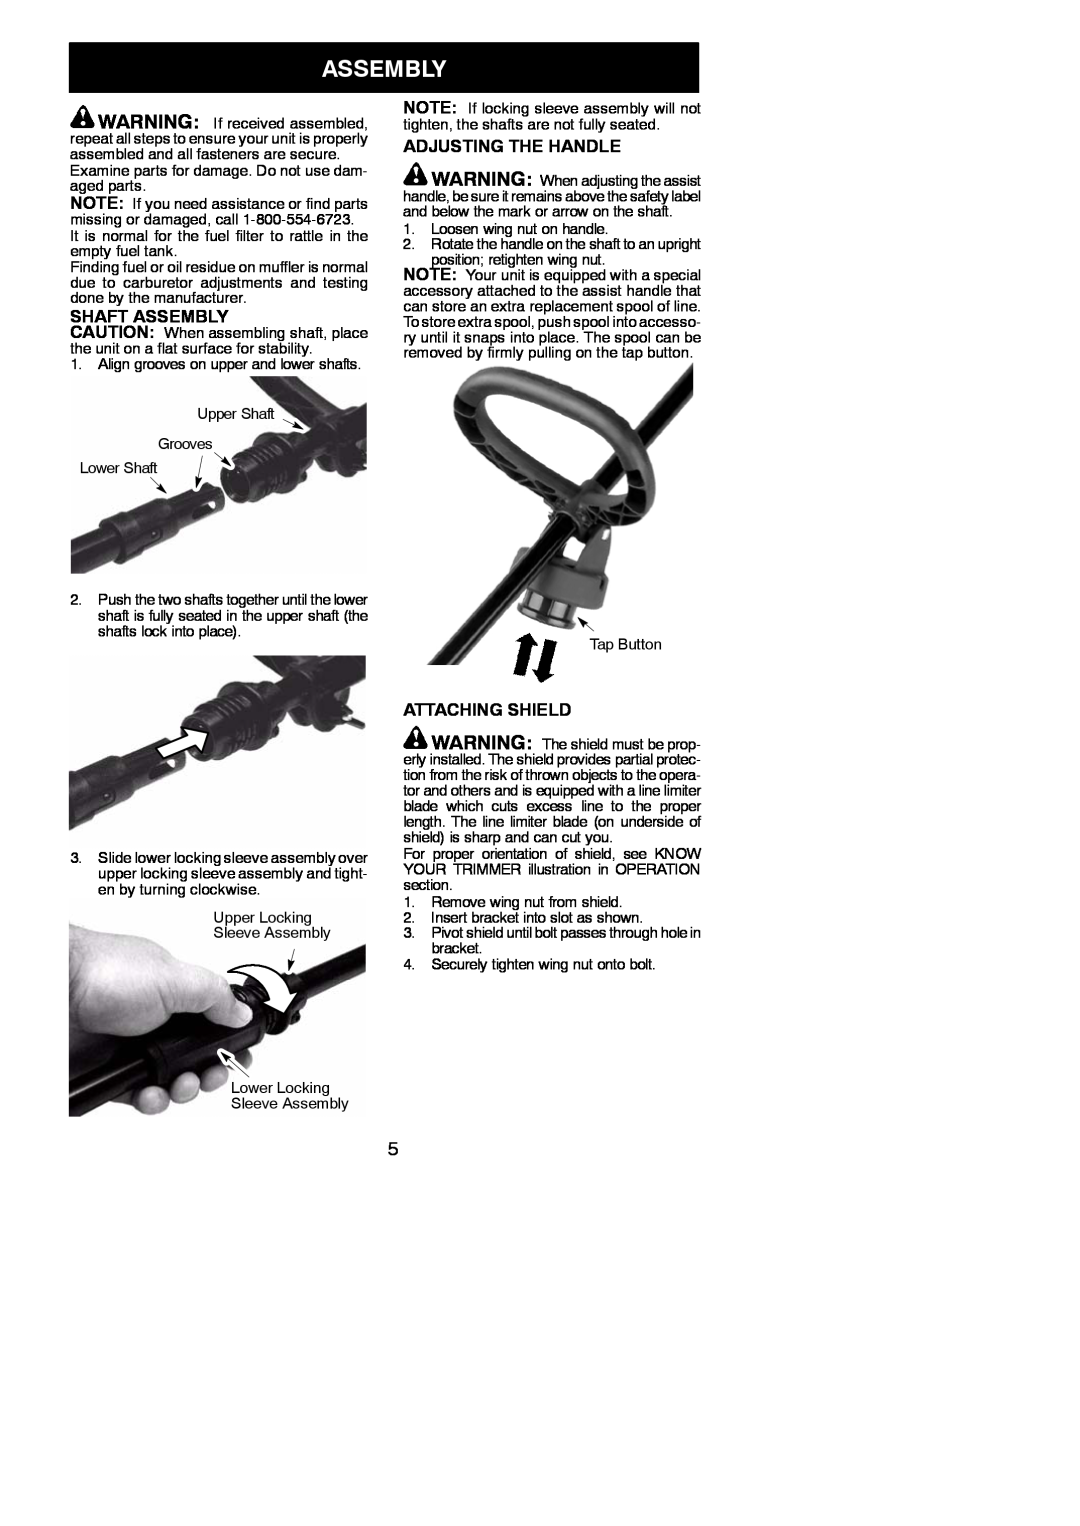 Weed Eater 952711941, FX20SC instruction manual Shaft Assembly, Adjusting The Handle, Attaching Shield 